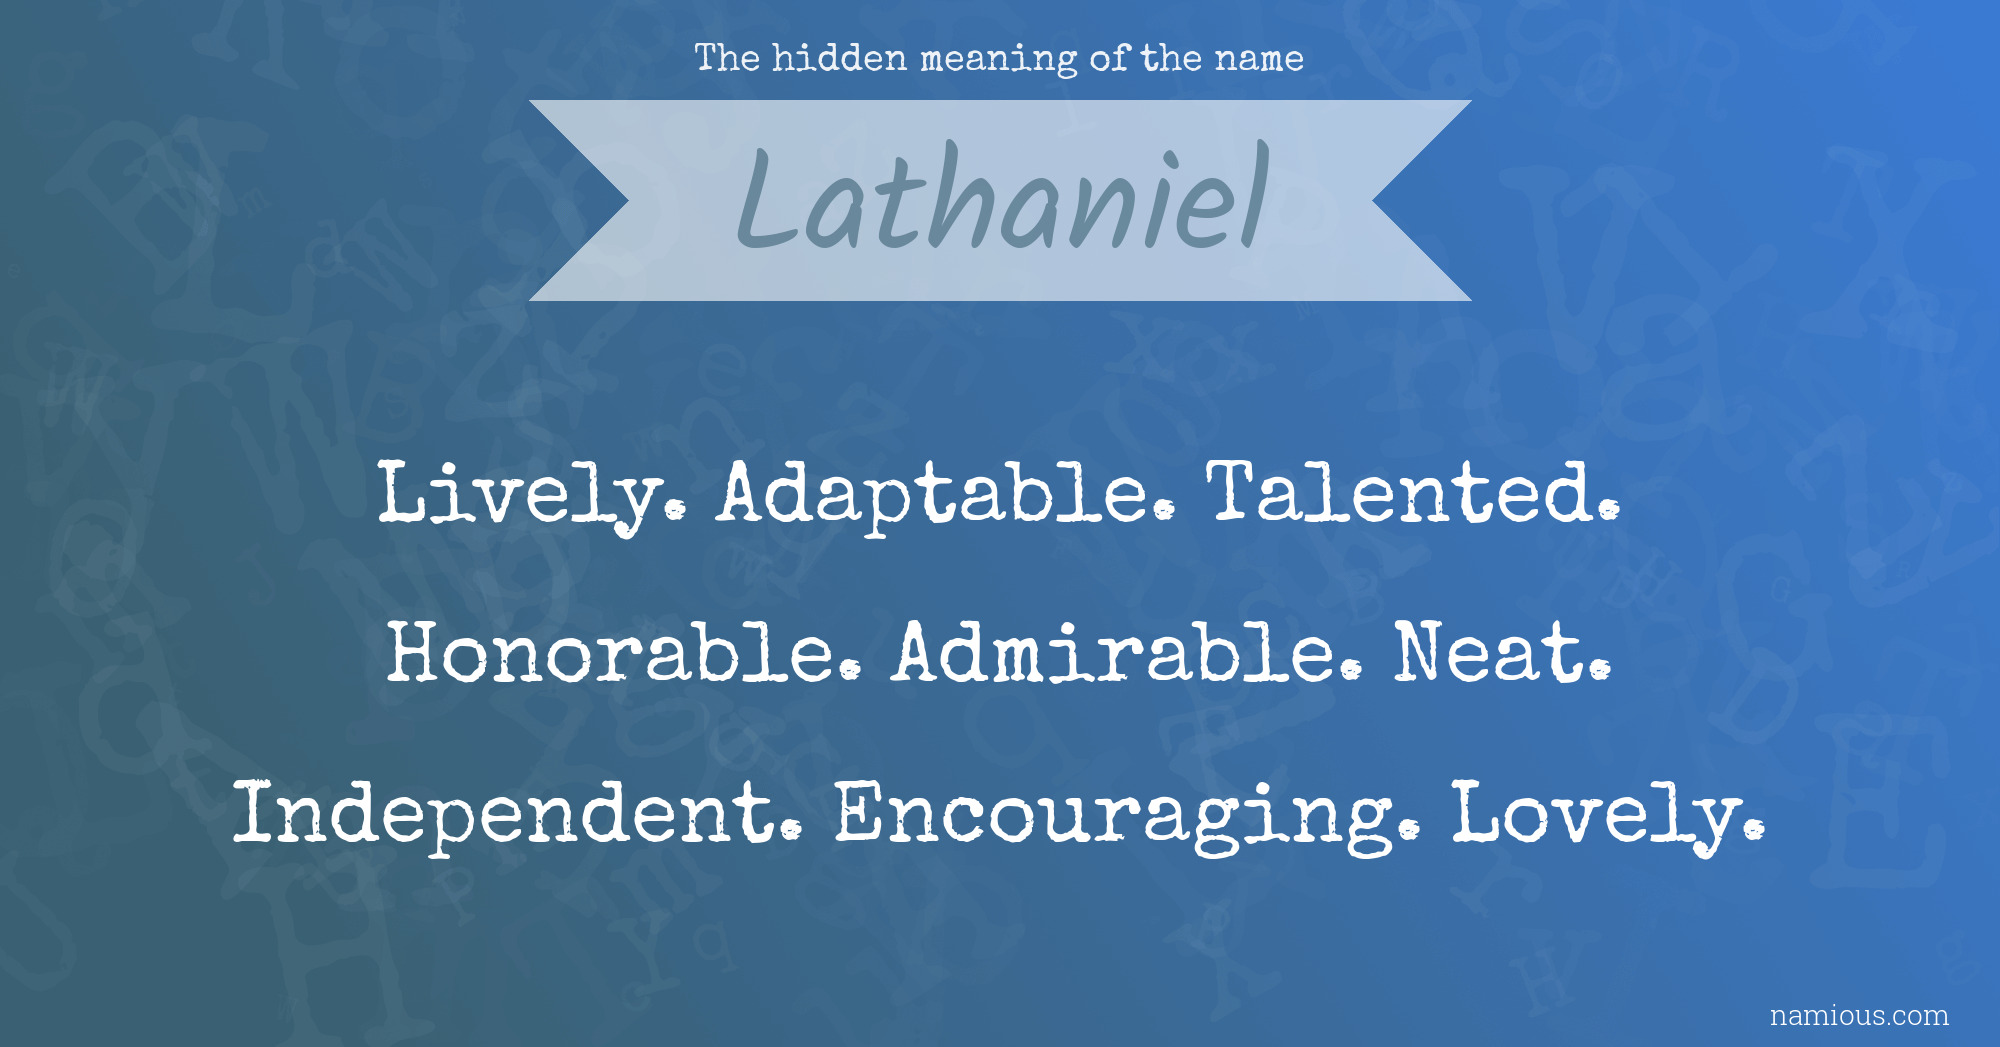 The hidden meaning of the name Lathaniel